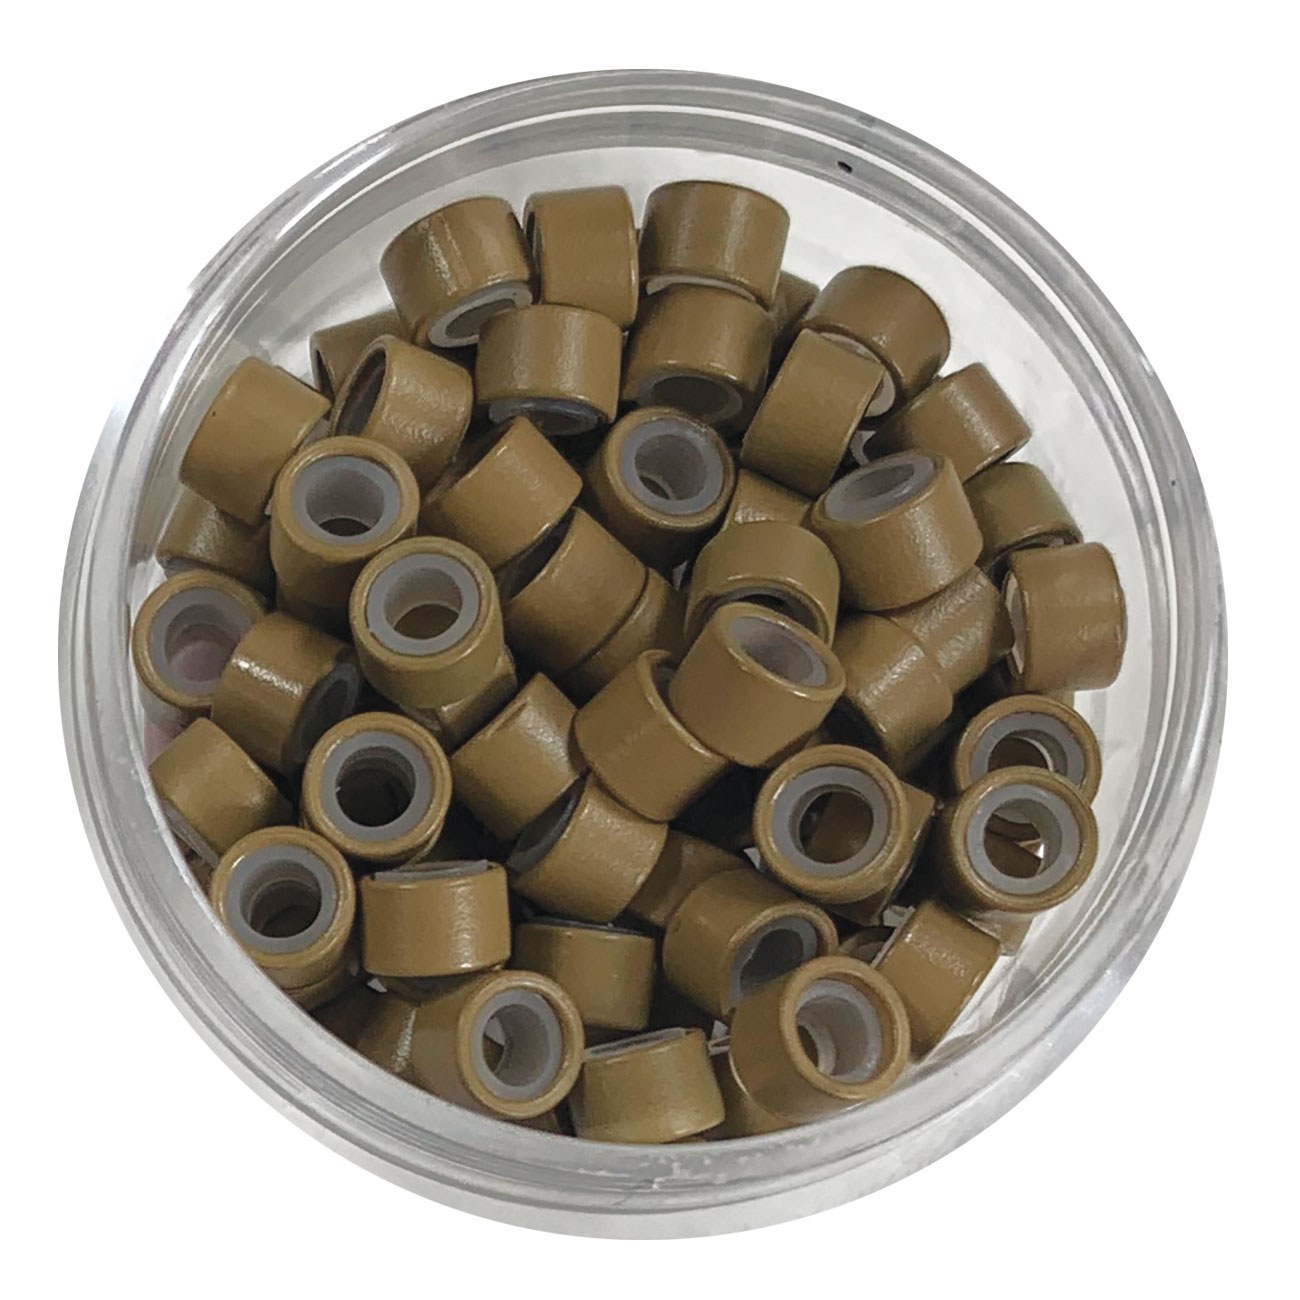 Halo Pro Silicone Beads, Light Brown - 100 Pack